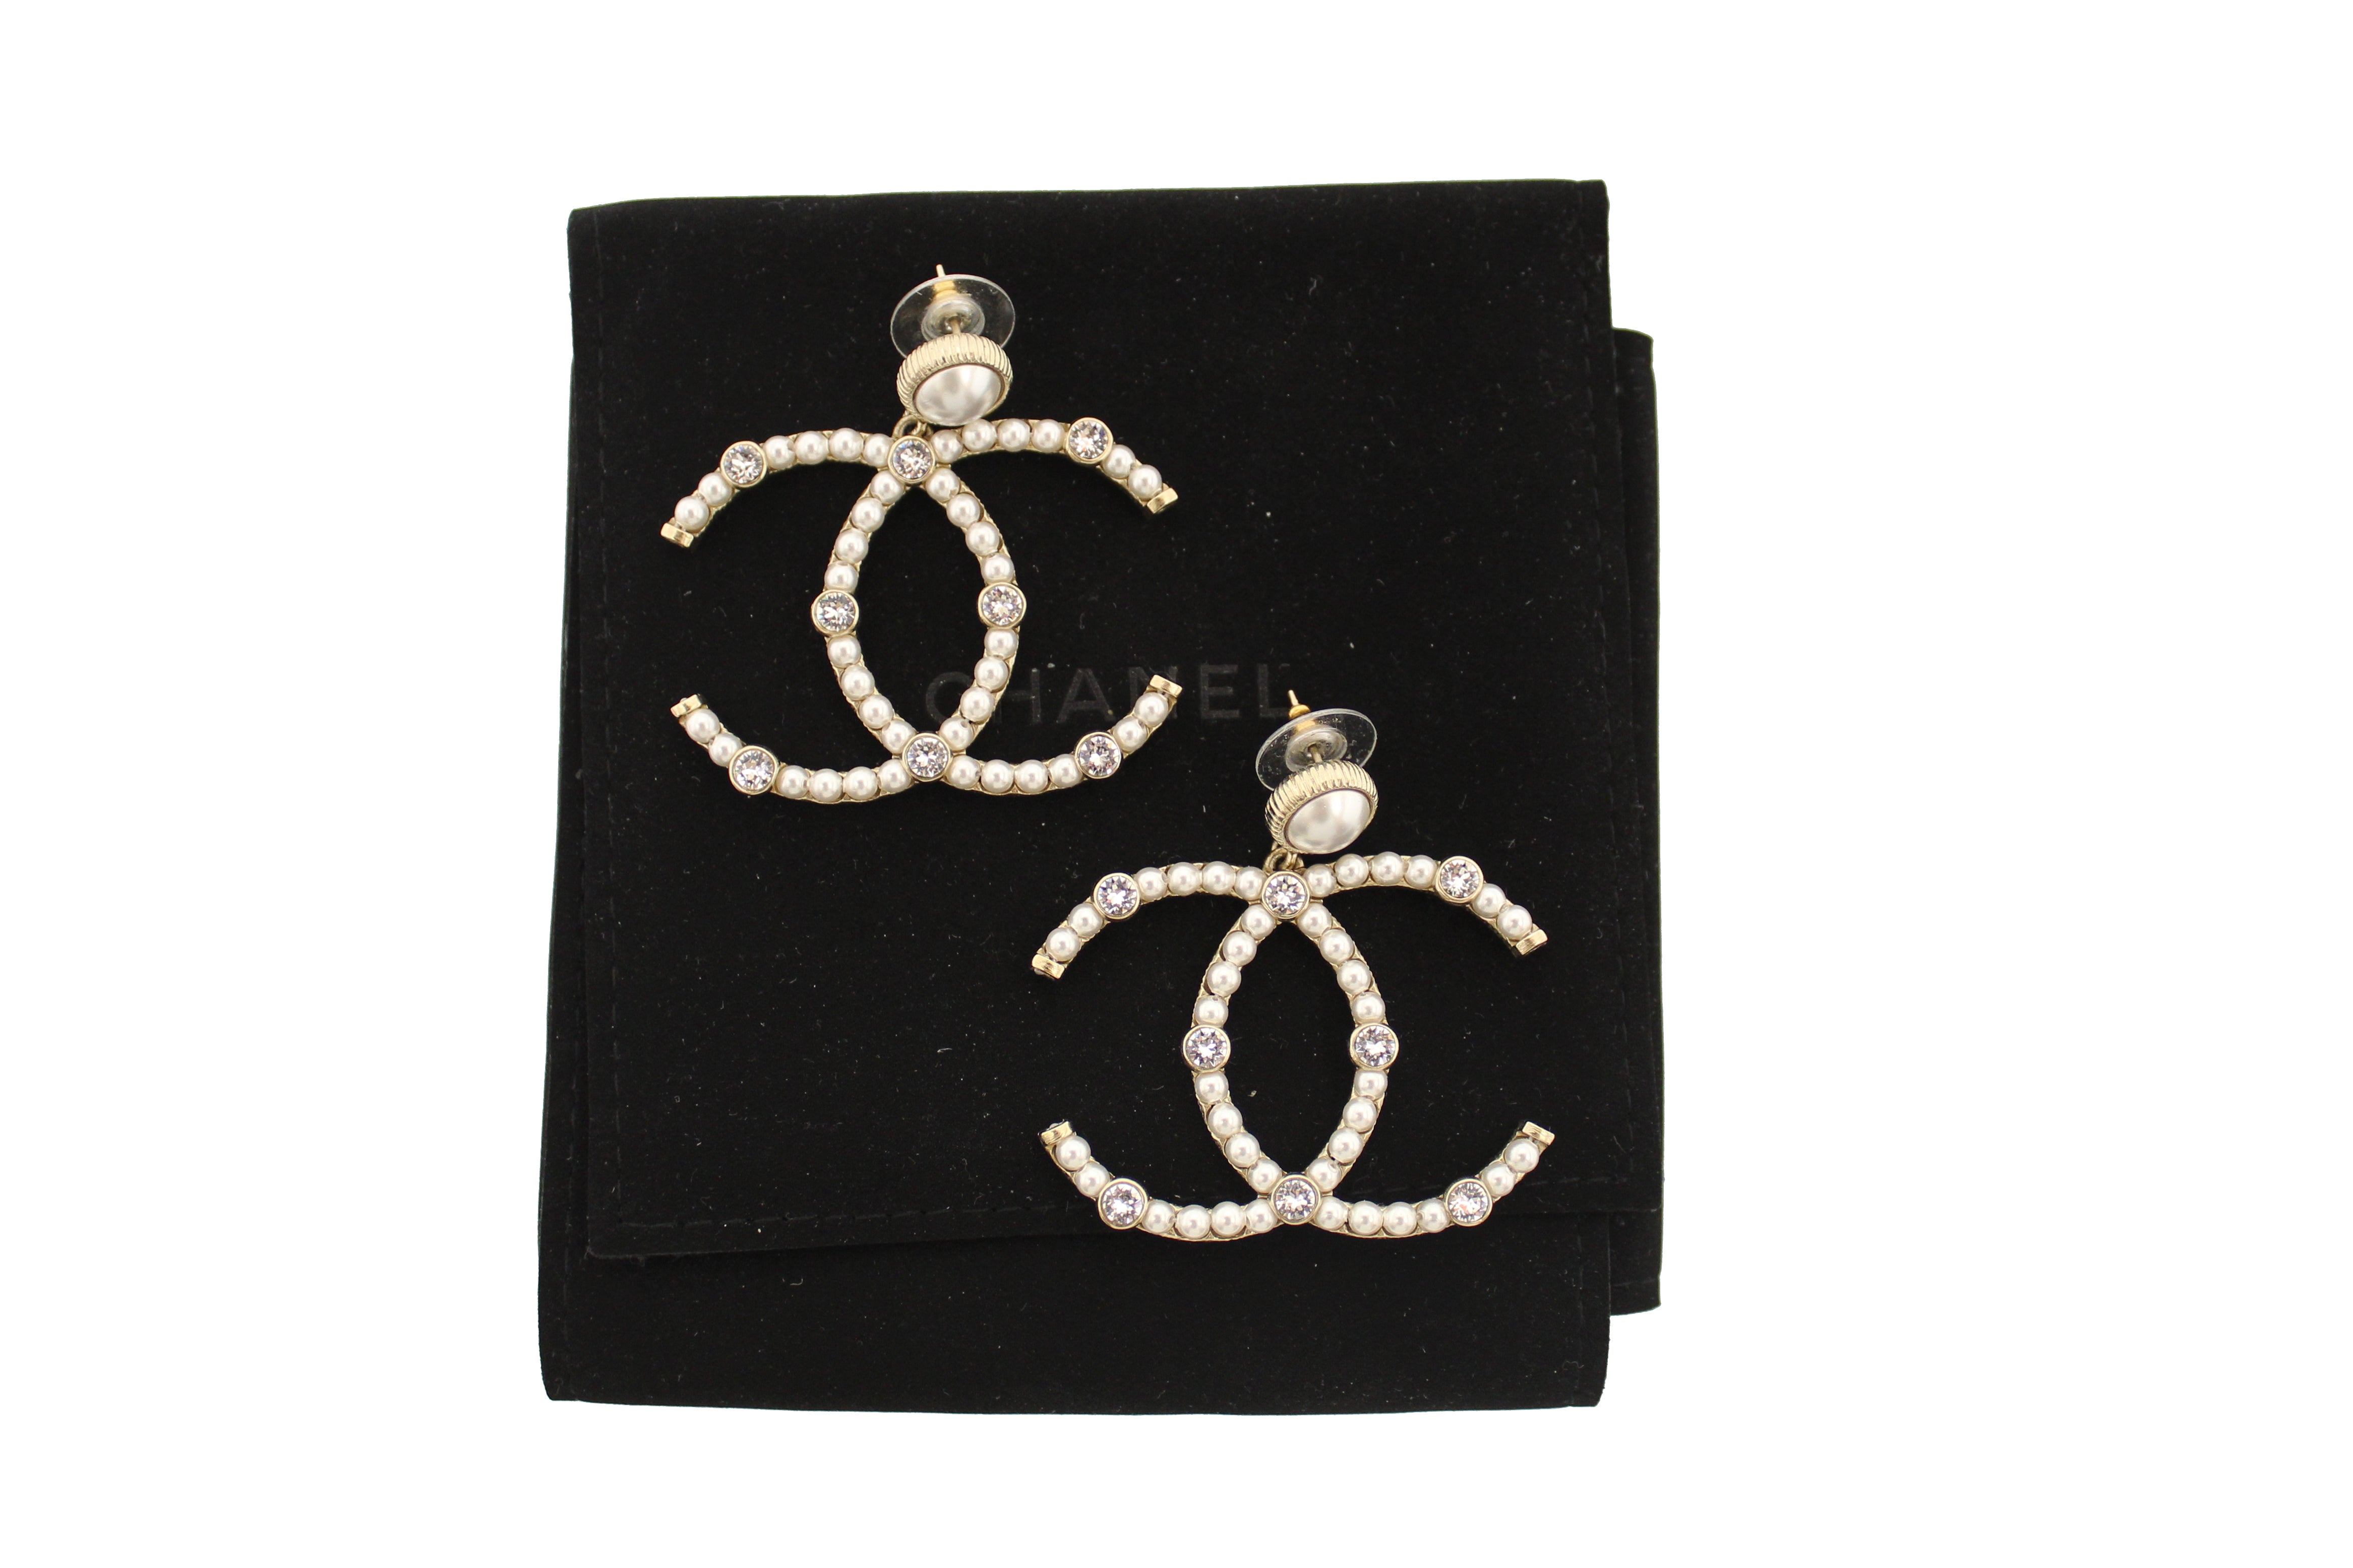 Authentic Chanel Classic CC Light Gold-Tone Pearl and Crystal Earrings